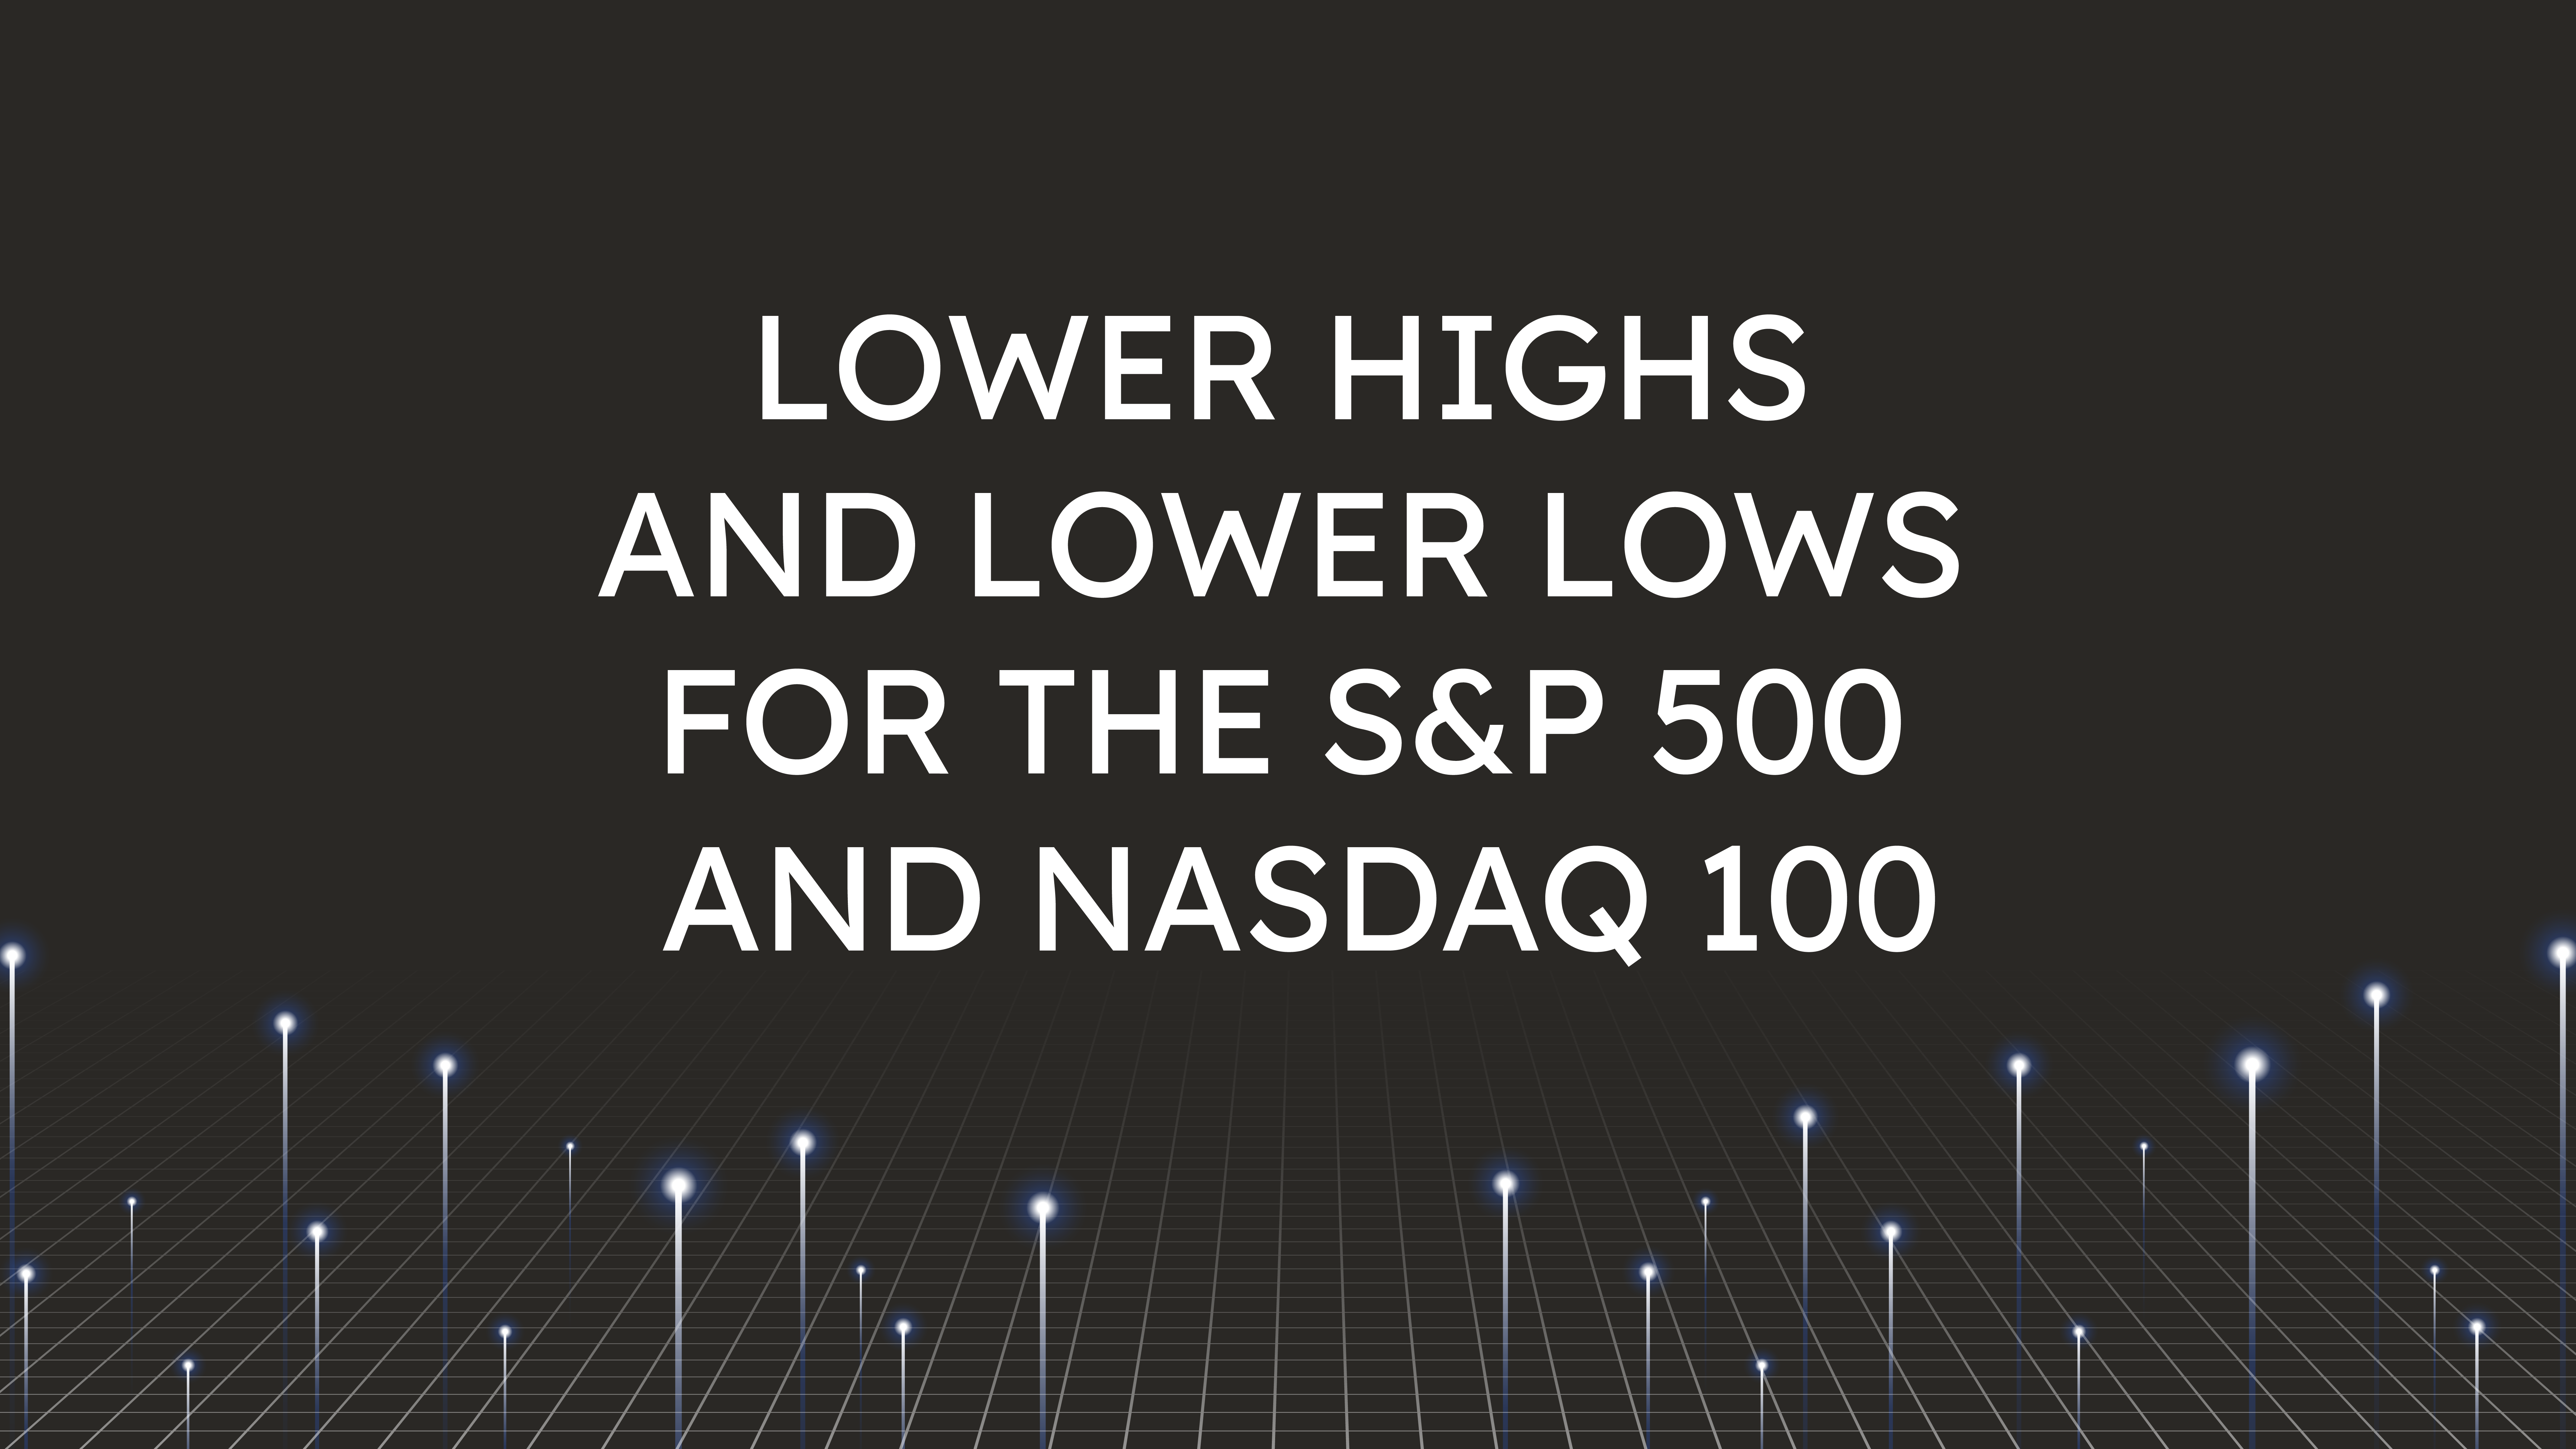 Lower Highs and Lower Lows  for the S&P 500 and NASDAQ 100